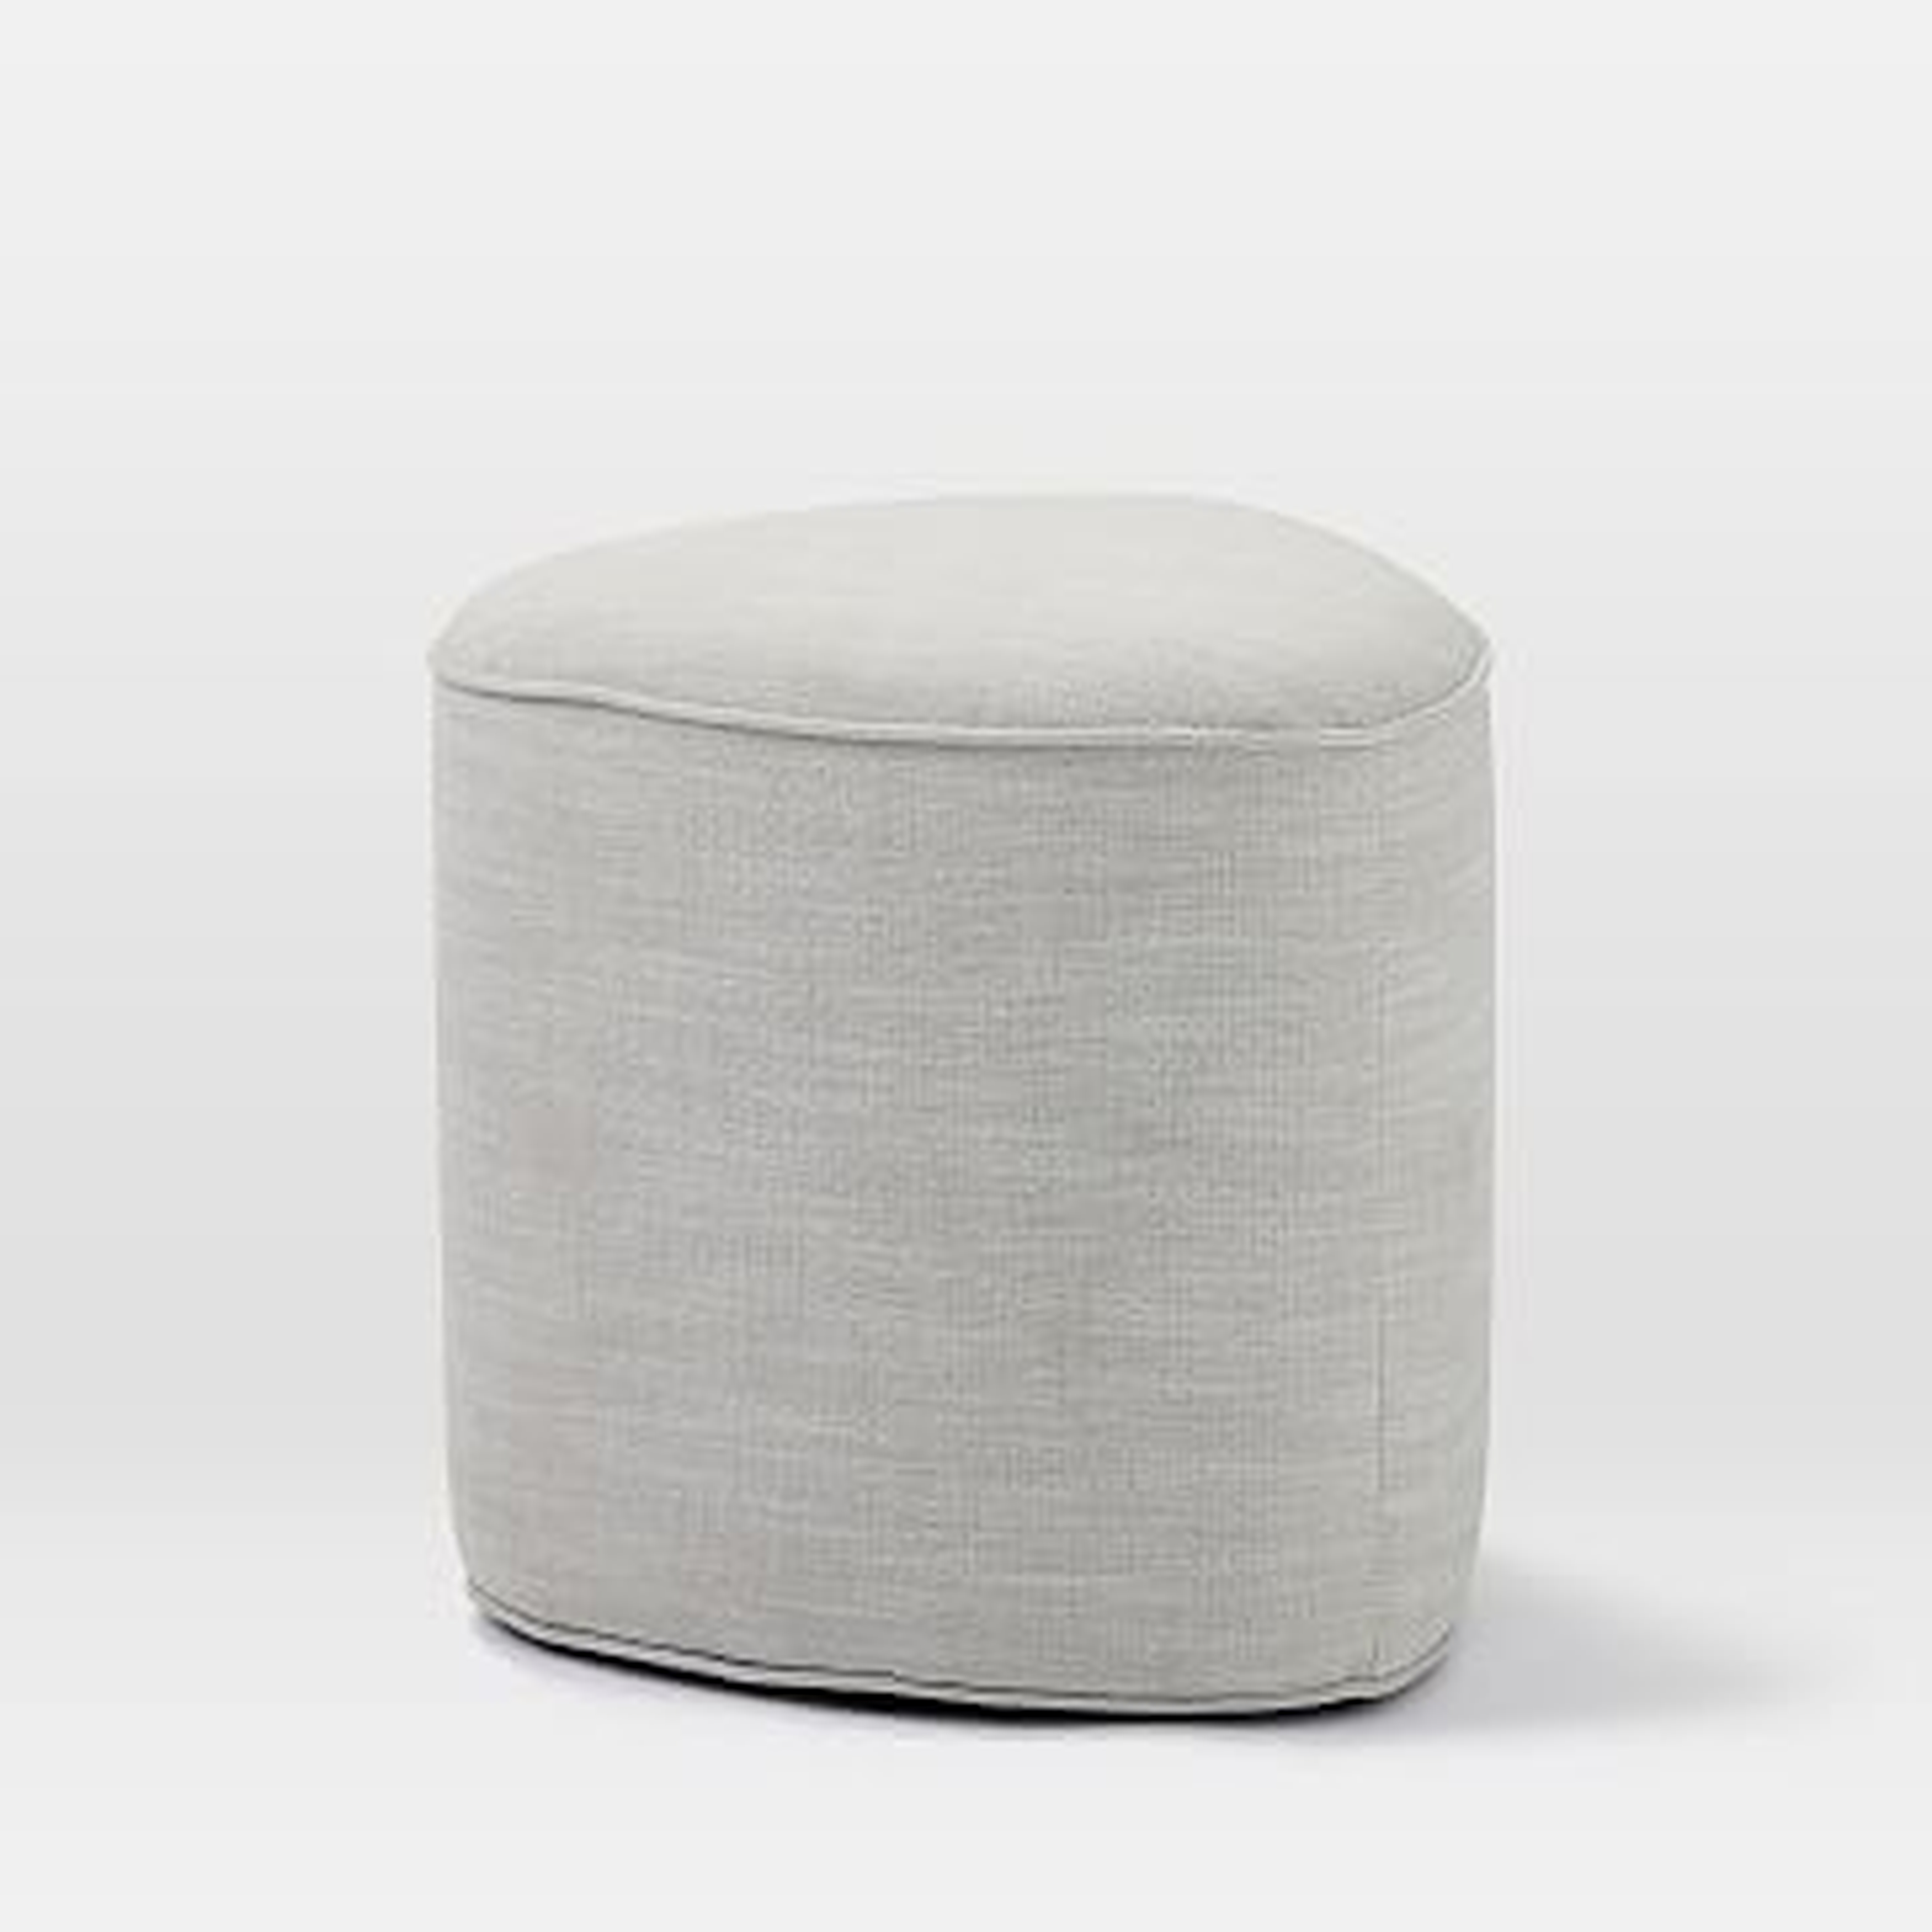 Pebble Ottoman, Small, Yarn Dyed Linen Weave, Frost Gray - West Elm